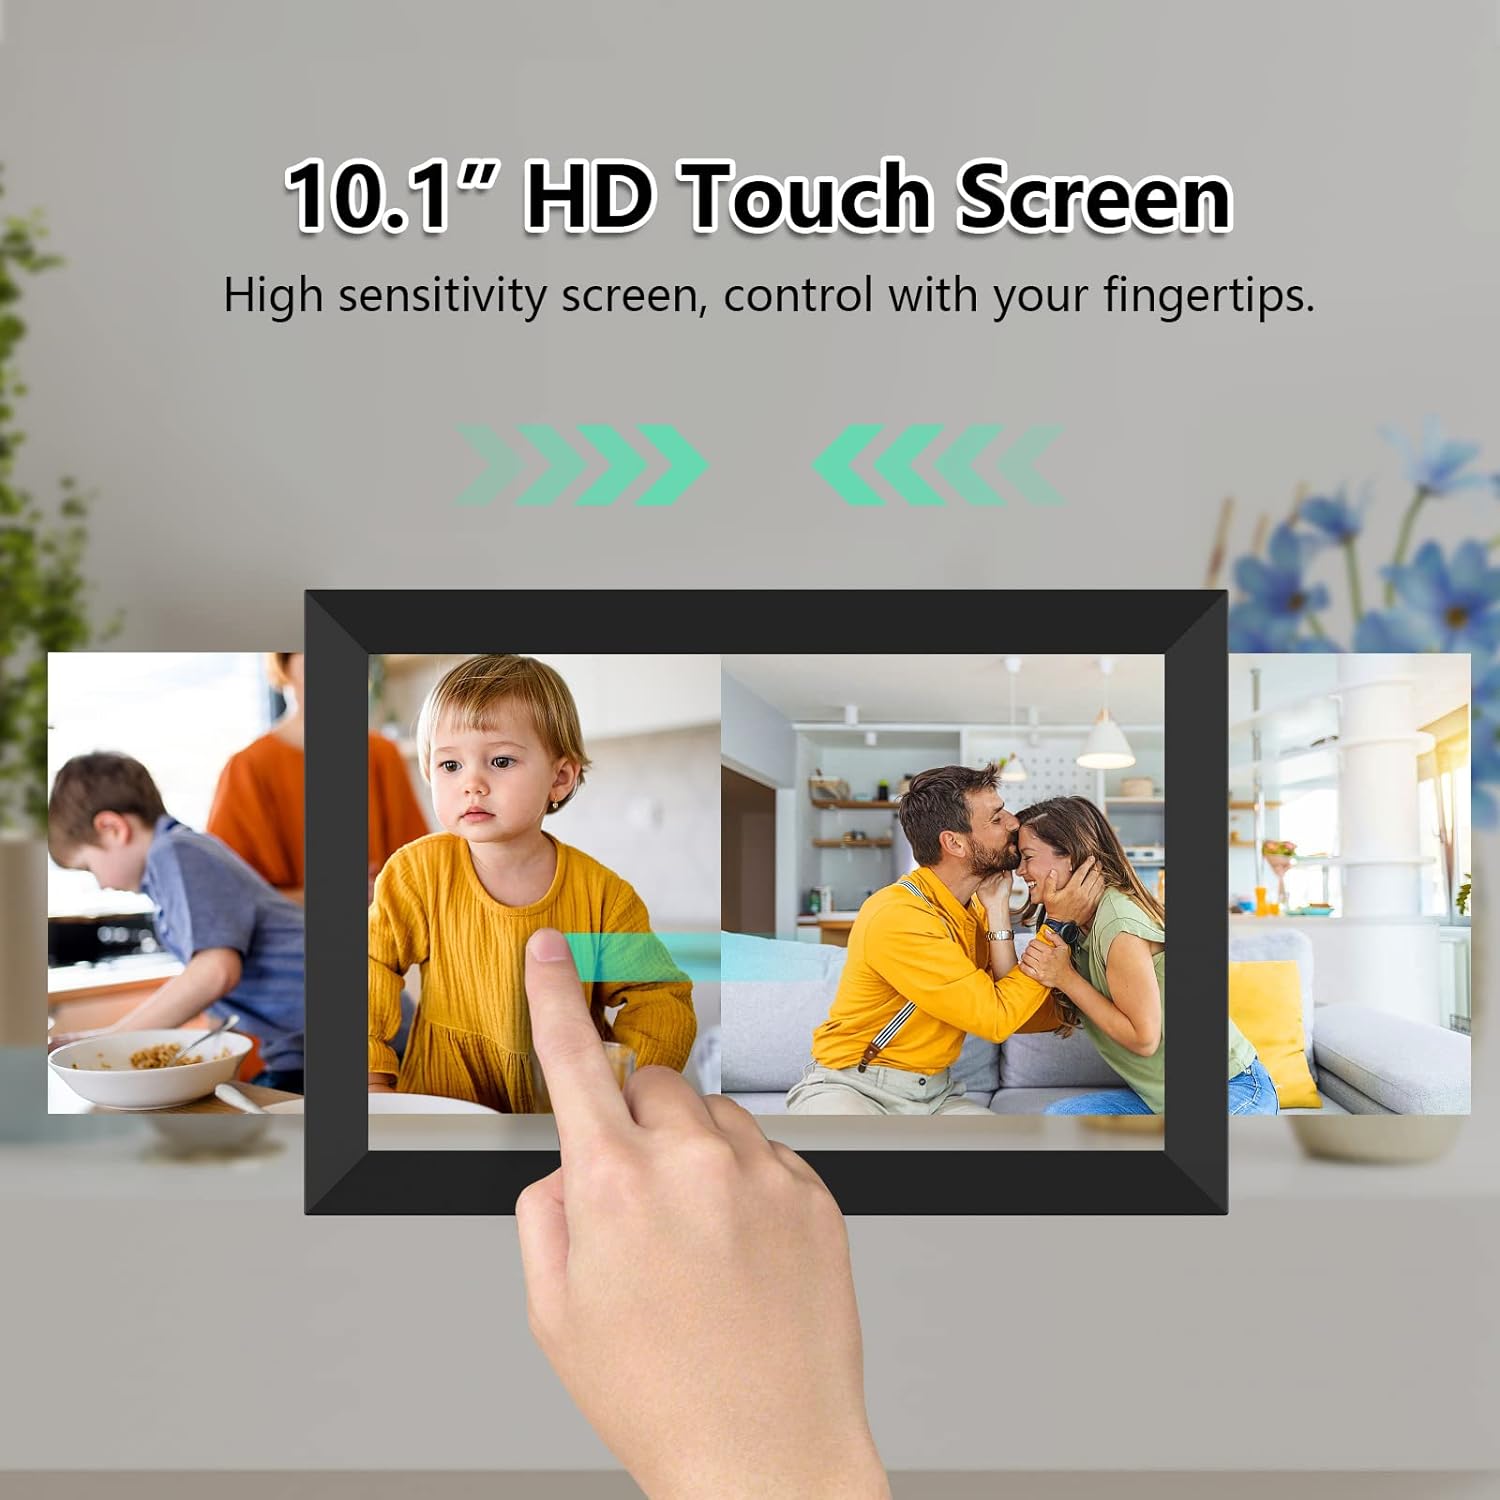 FRAMEO Smart Digital Picture Frame WiFi Cloud 10.1 Inch HD 1280x800 IPS Touch Screen Digital Frame with 16GB Storage Easy Setup to Share Photos or Video via Frameo APP Auto-Rotate Wall Mountable Black